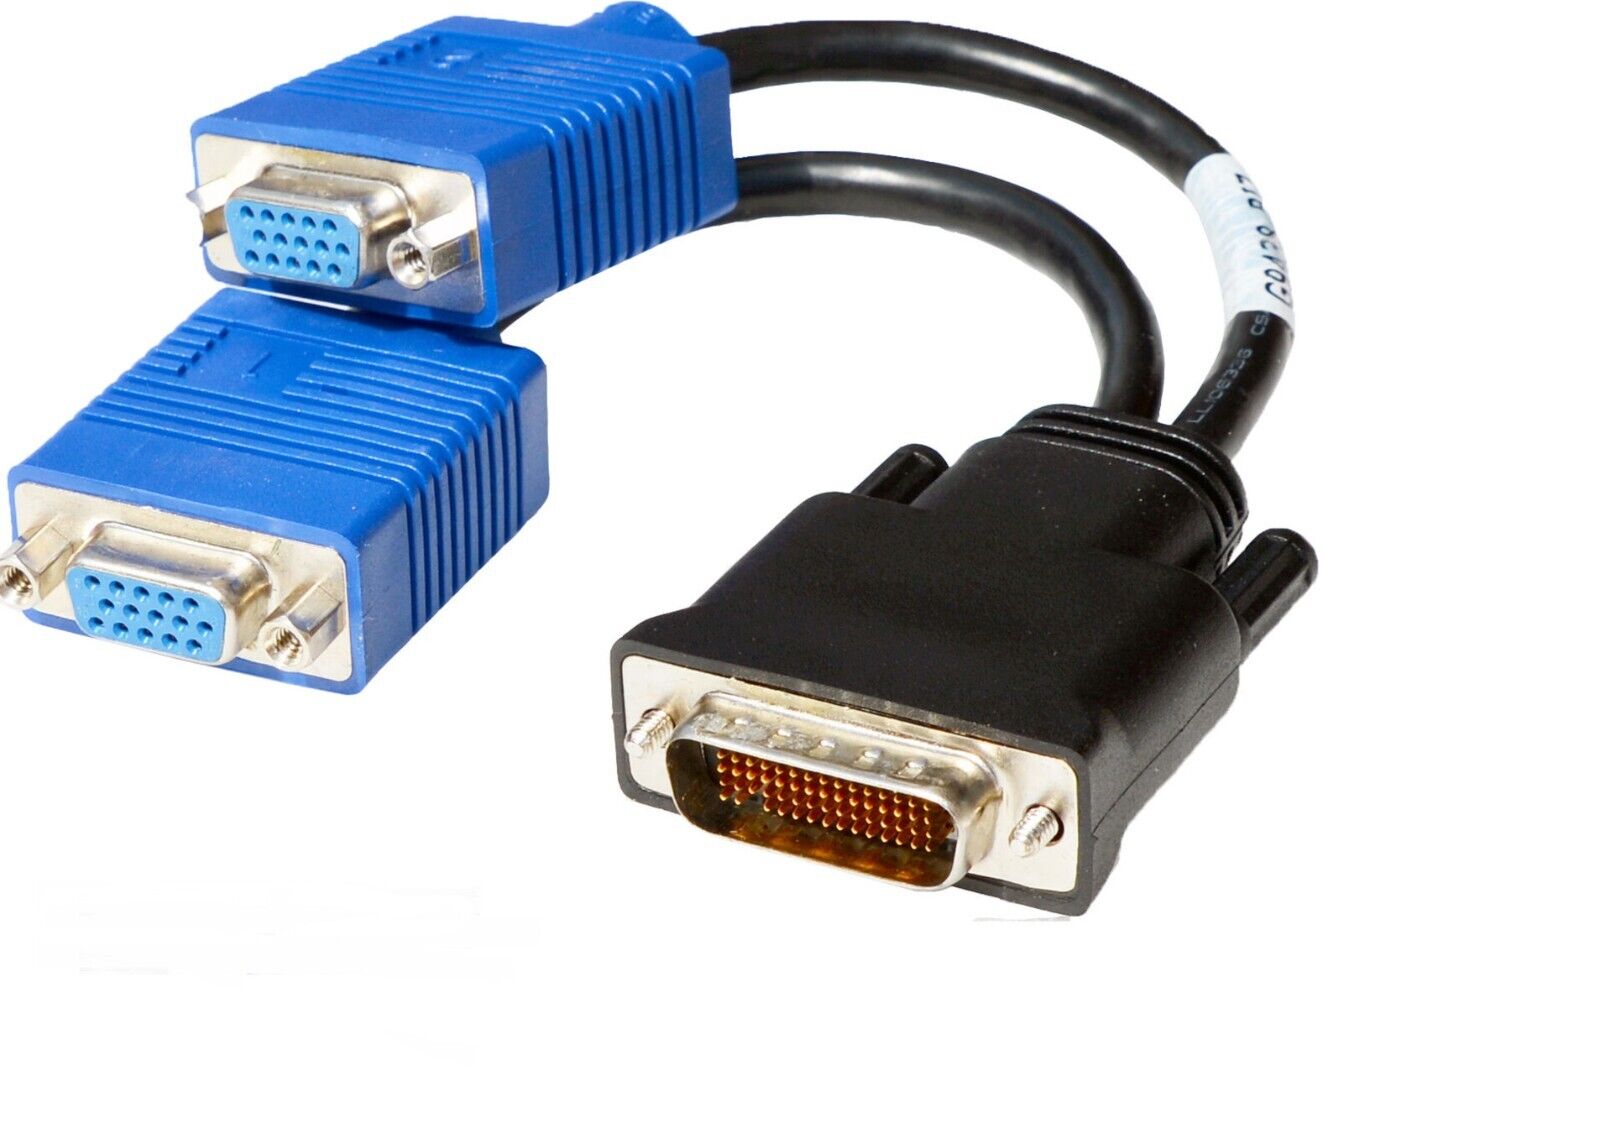 BIZ DMS-59 Computer Video Cable Adapter G9438 Male to Dual Female VGA 15 Pin L-N